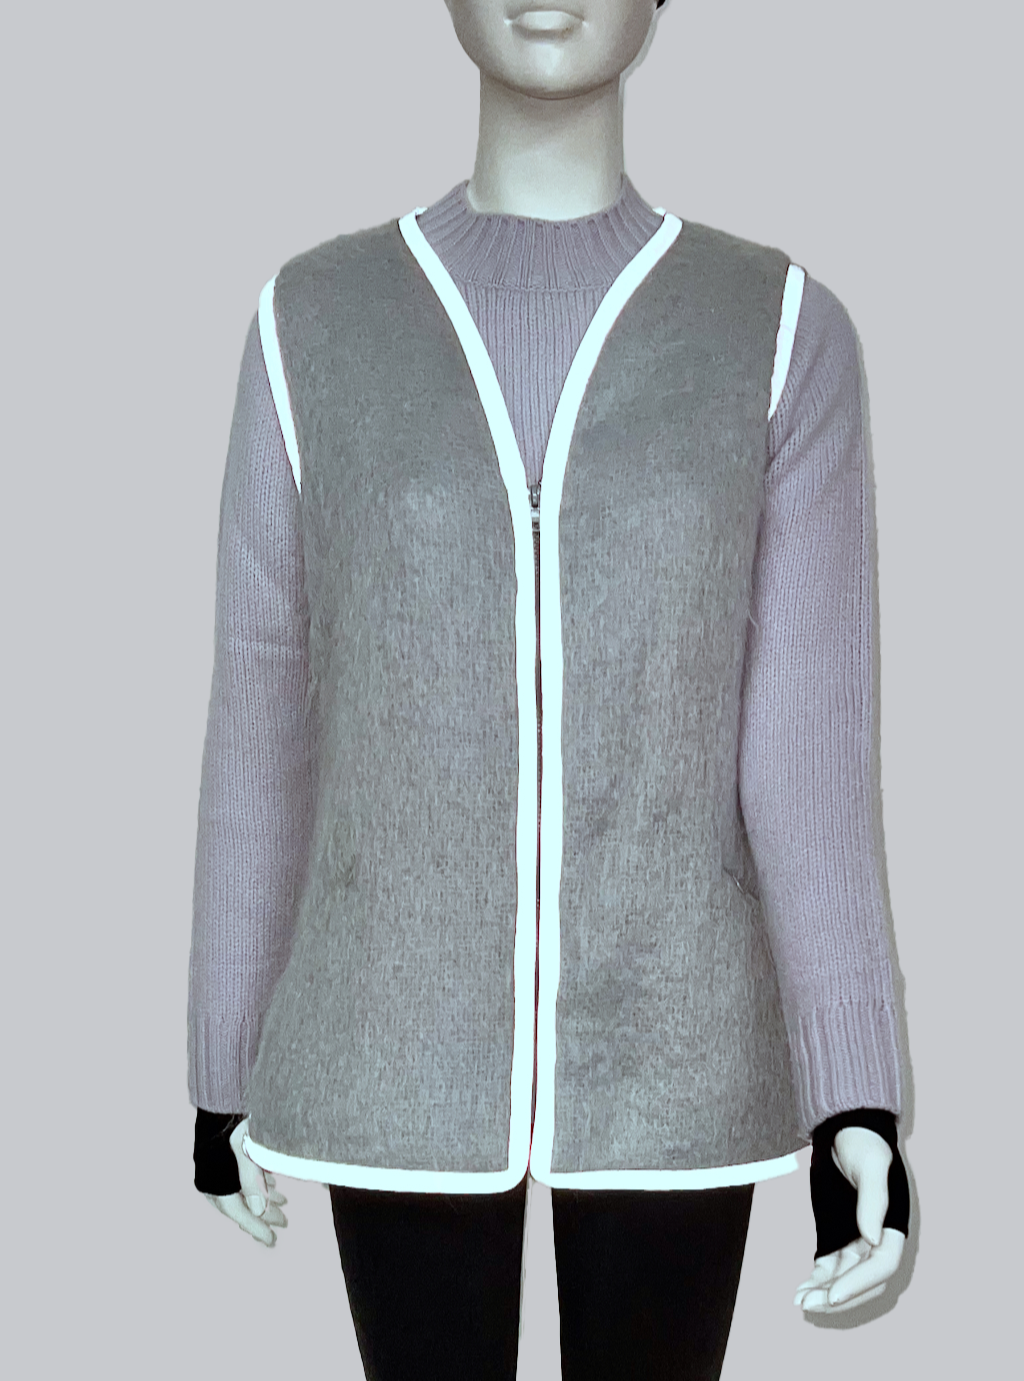 The Mohair Cardigan Sweater Vest, Silver Grey w/Reflective Trim